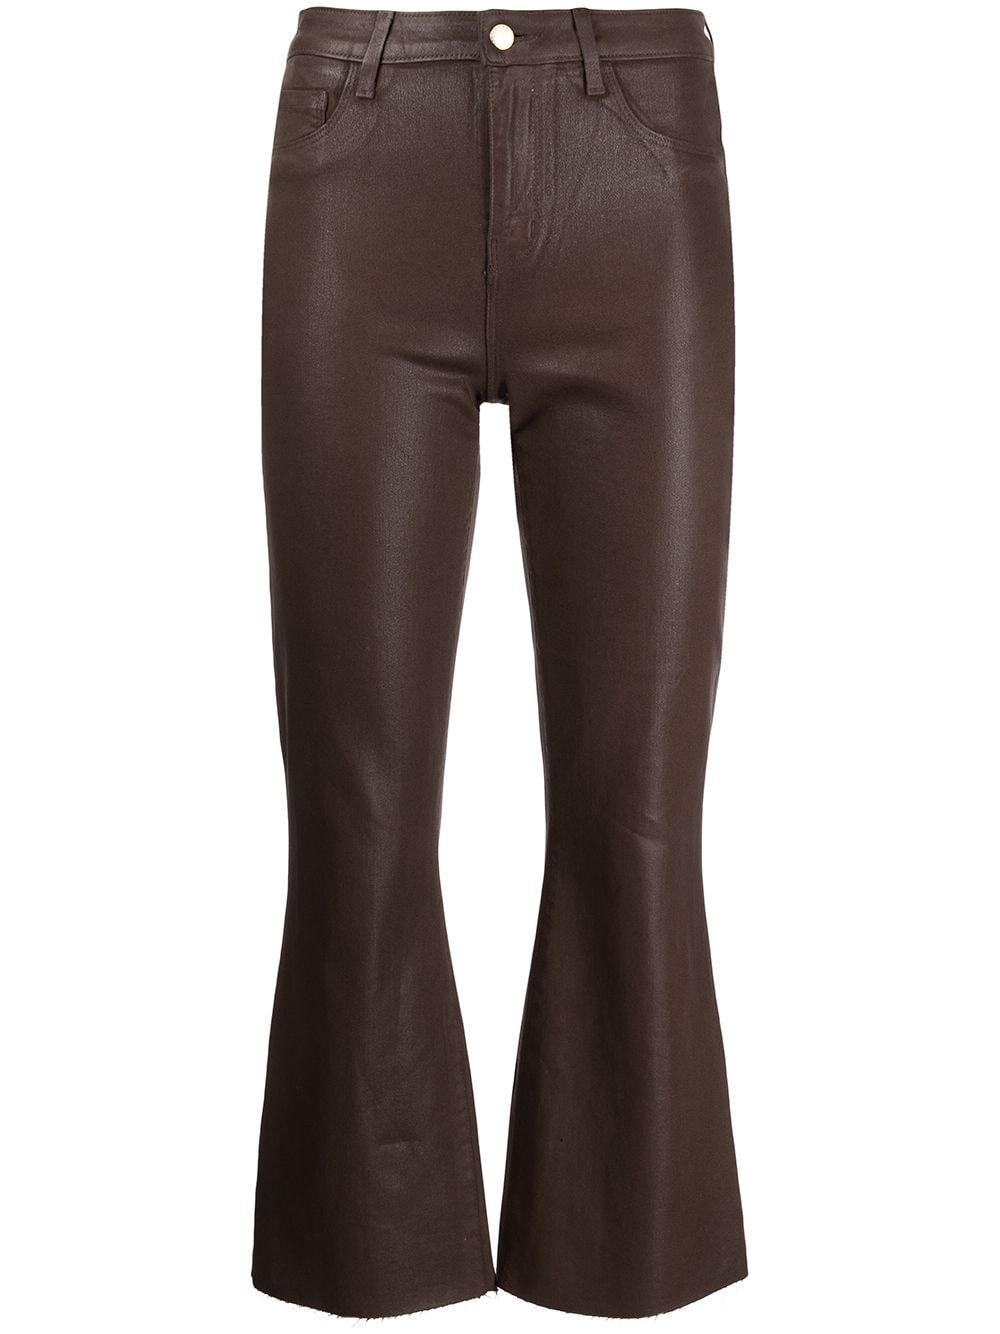 L'Agence Kendra coated cropped jeans - Brown von L'Agence